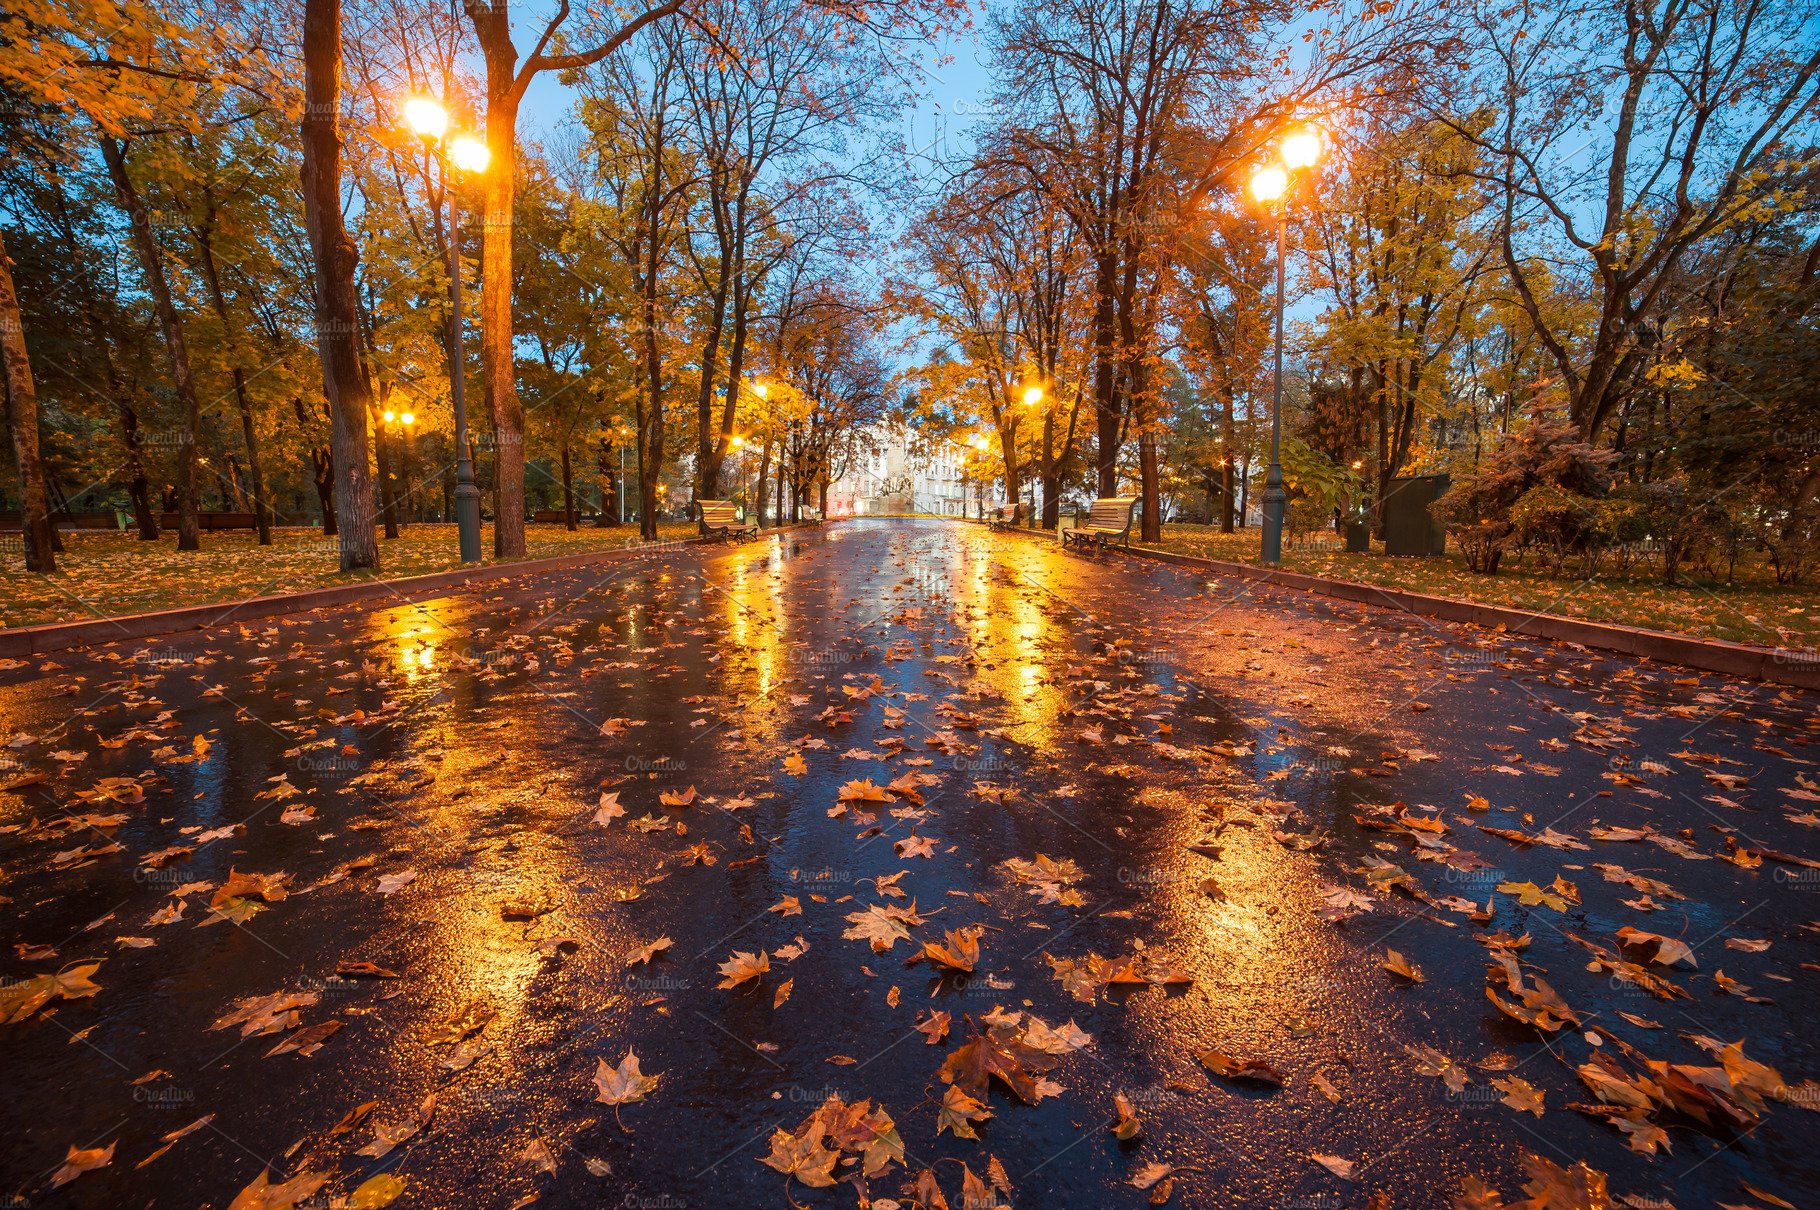 City Autumn Park After Rain Featuring Landscape, Autumn, And Fall. High Quality Nature Creative Market